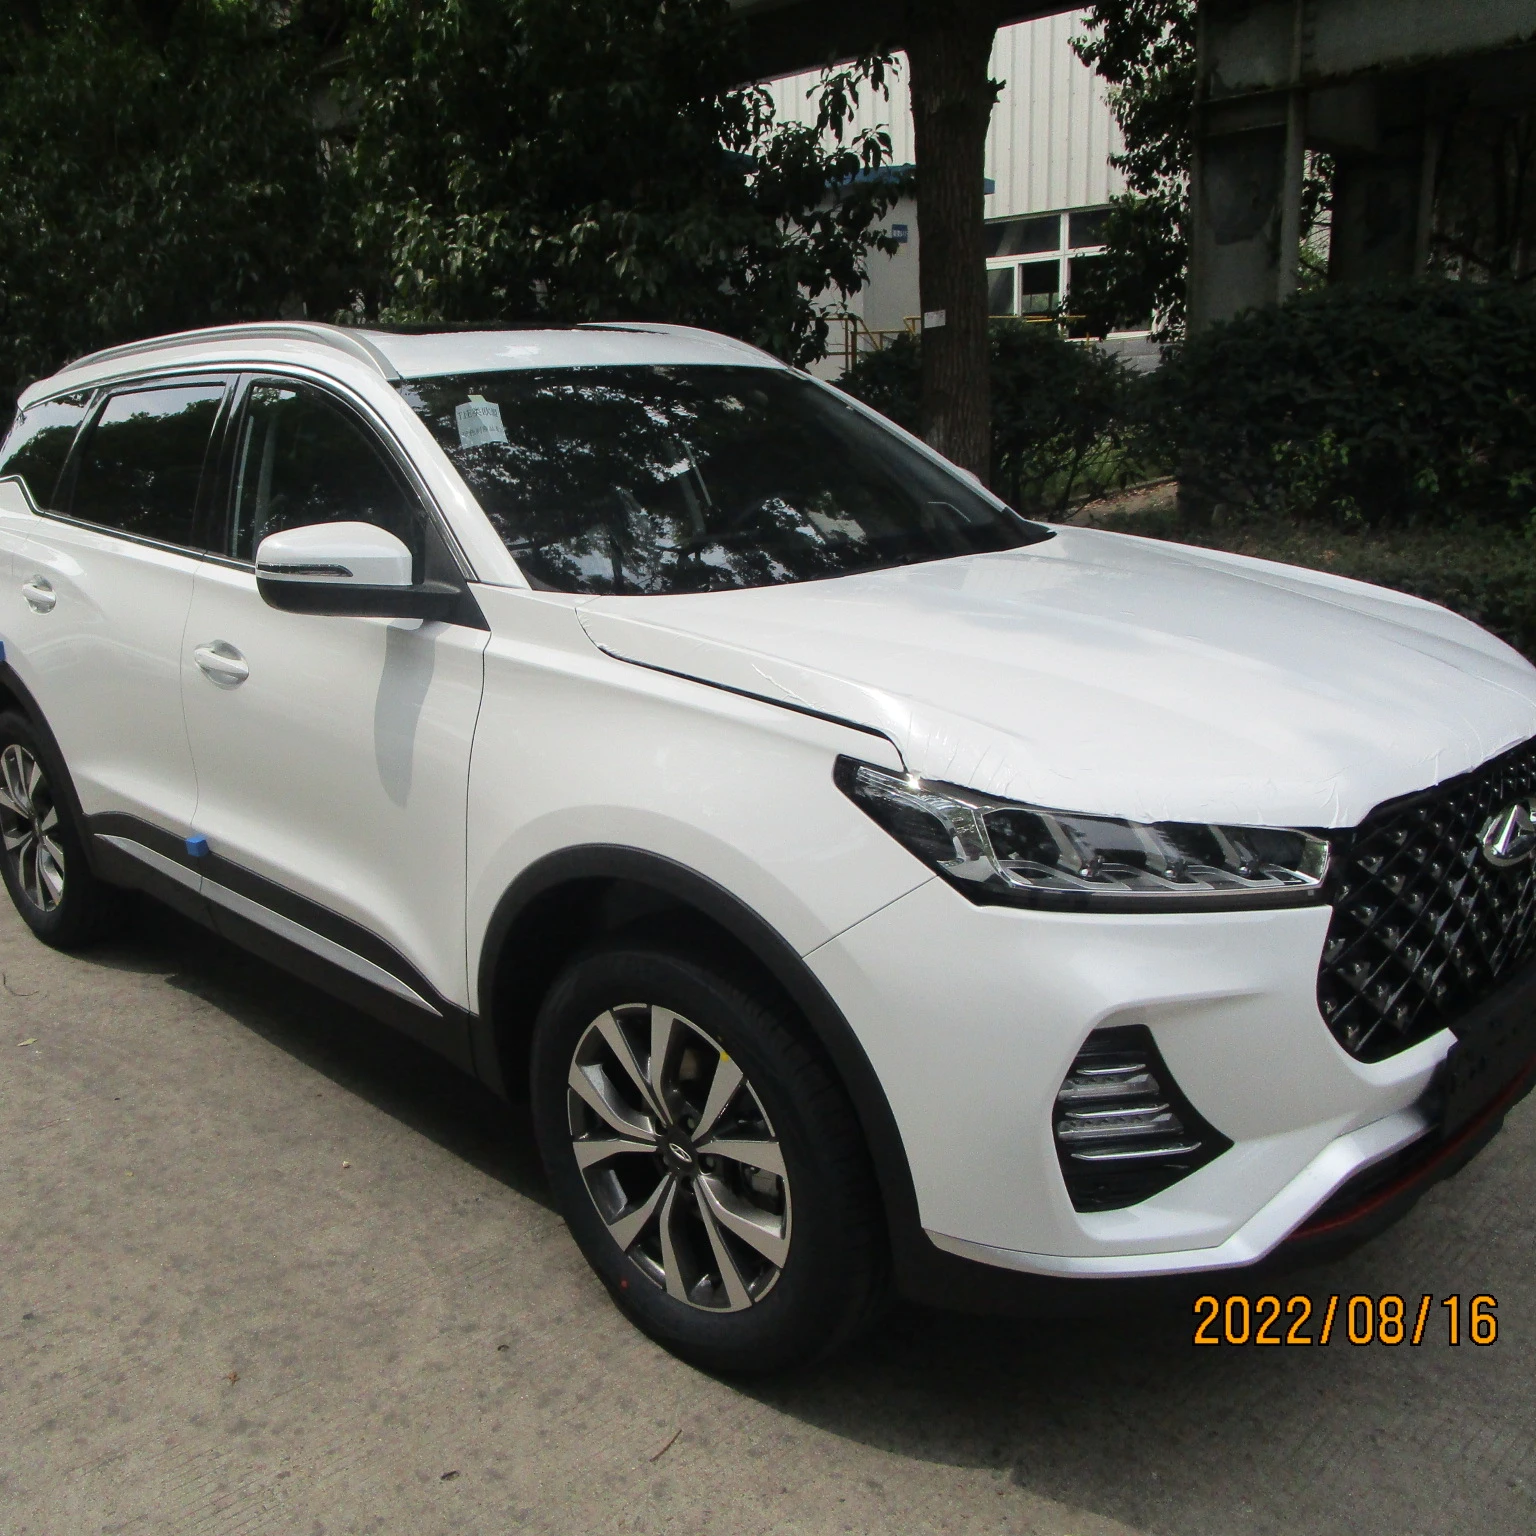 Wuhu New Used car dropshipping service / trade assurance service / quality control product inspection